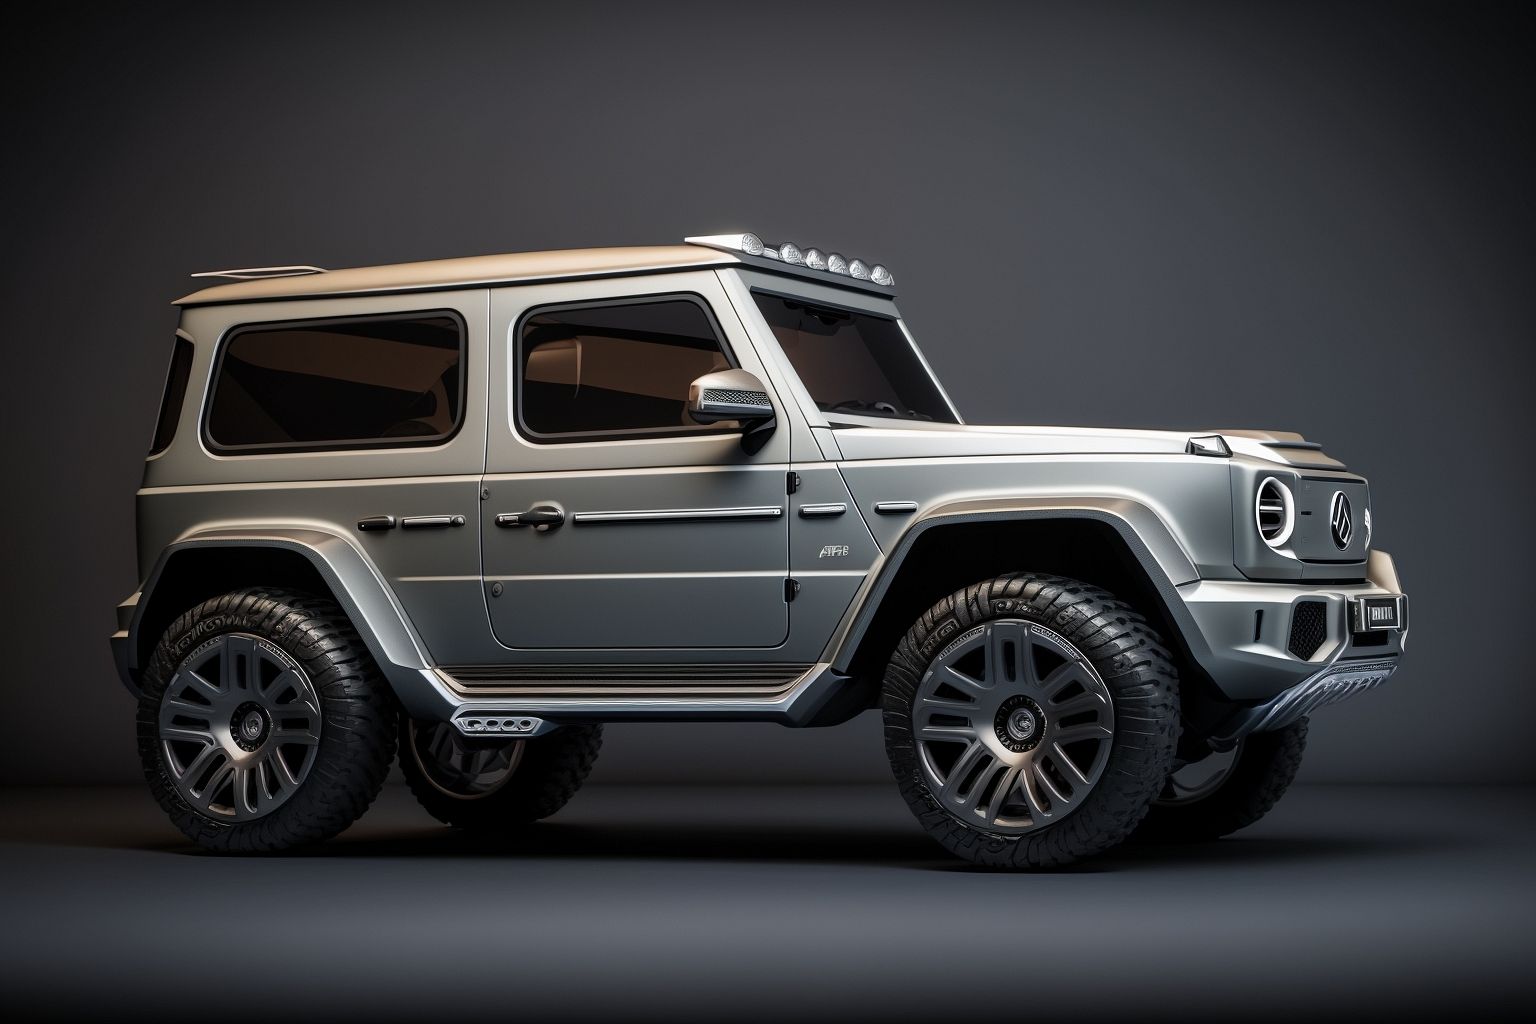 Mercedes confirms 'little G' as a smaller sibling to the G-wagon